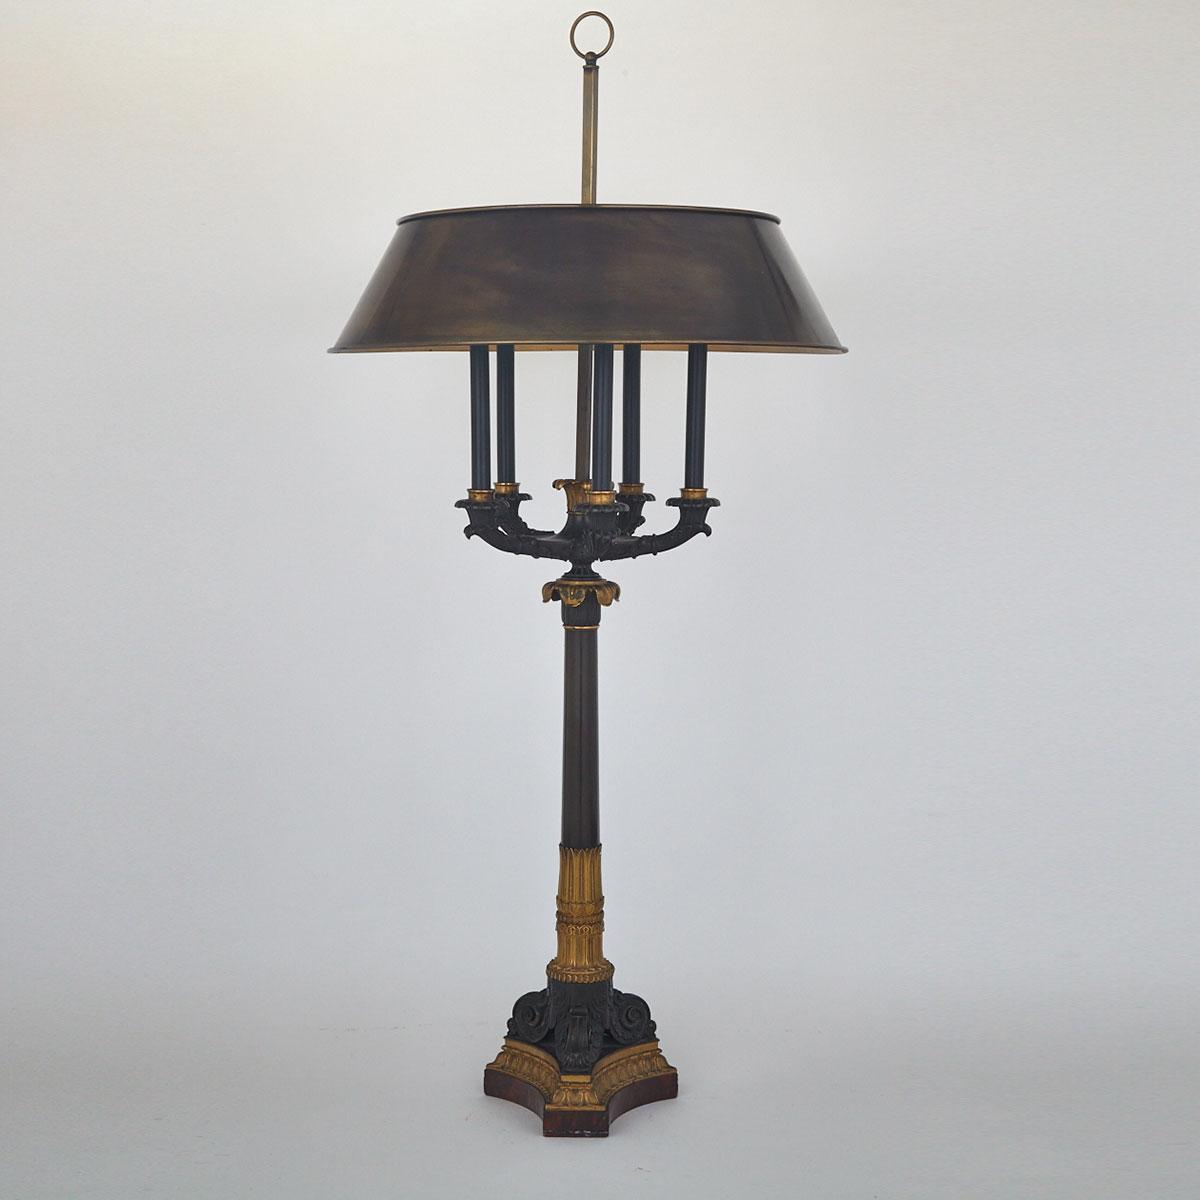 French Empire Gilt and Patinated Bronze Candelbrum Now Mounted as Desk Lamp, early-mid 19th century